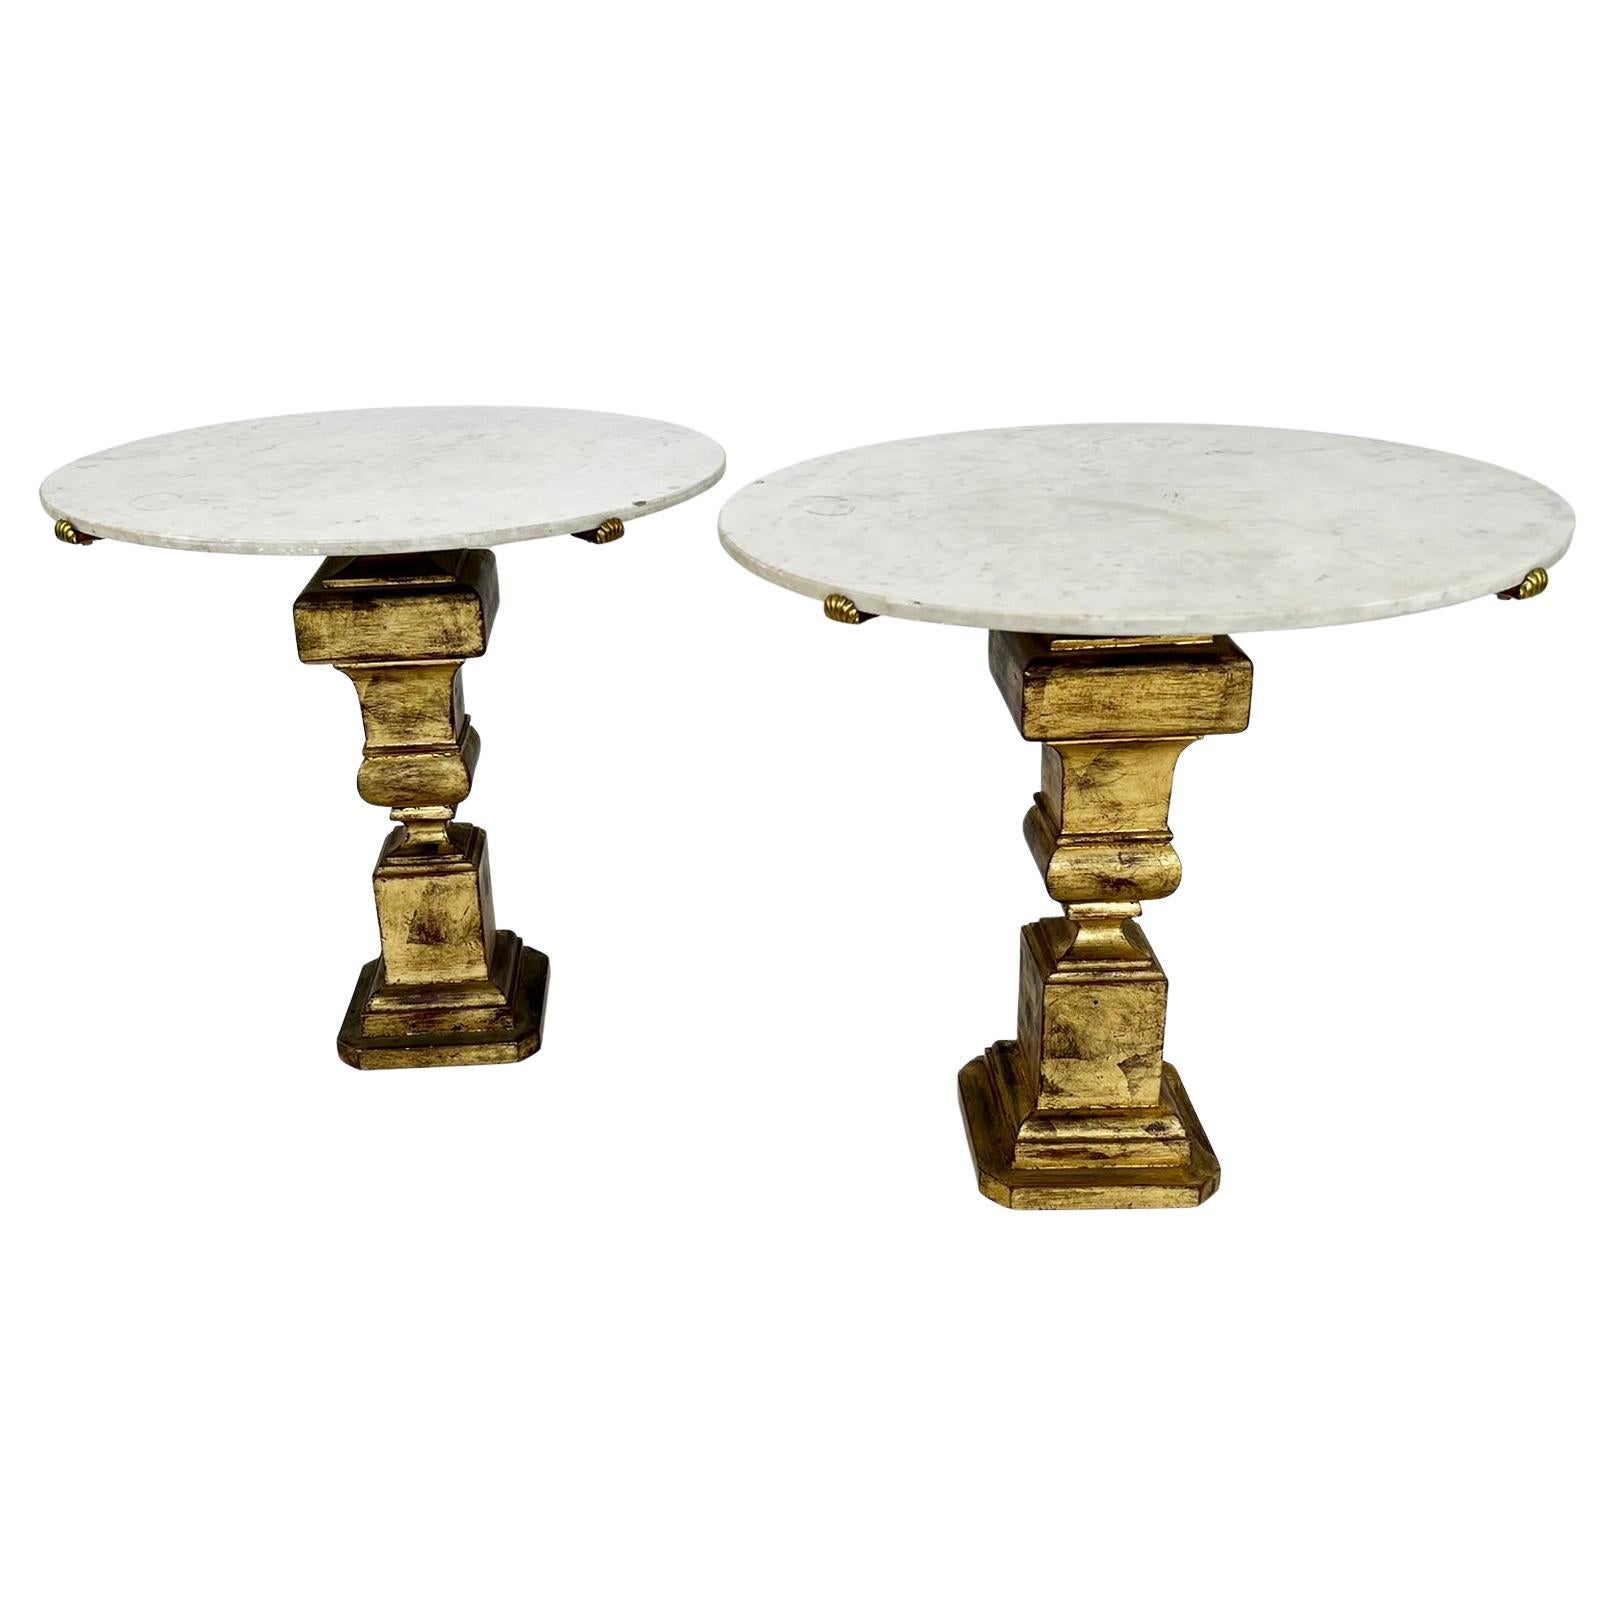 Pair of Palladio Accent Tables with Round Carrara Marble Tops